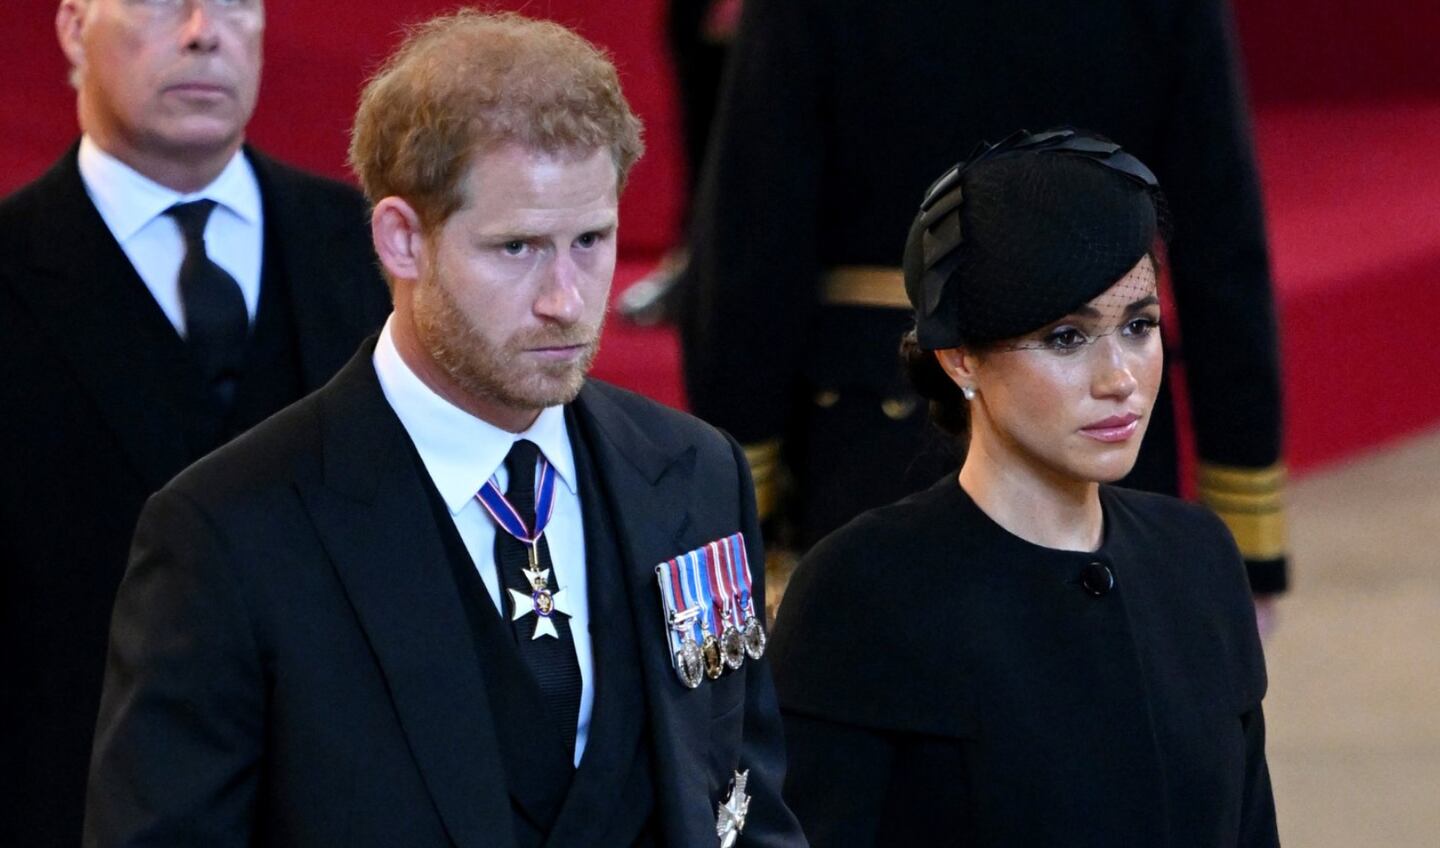 According to The Sun's source, Charles would have already agreed to give the titles of prince and princess to Achie and Lilibet, the children of Meghan and Harry, but this would not happen with the title of His Royal Highness.